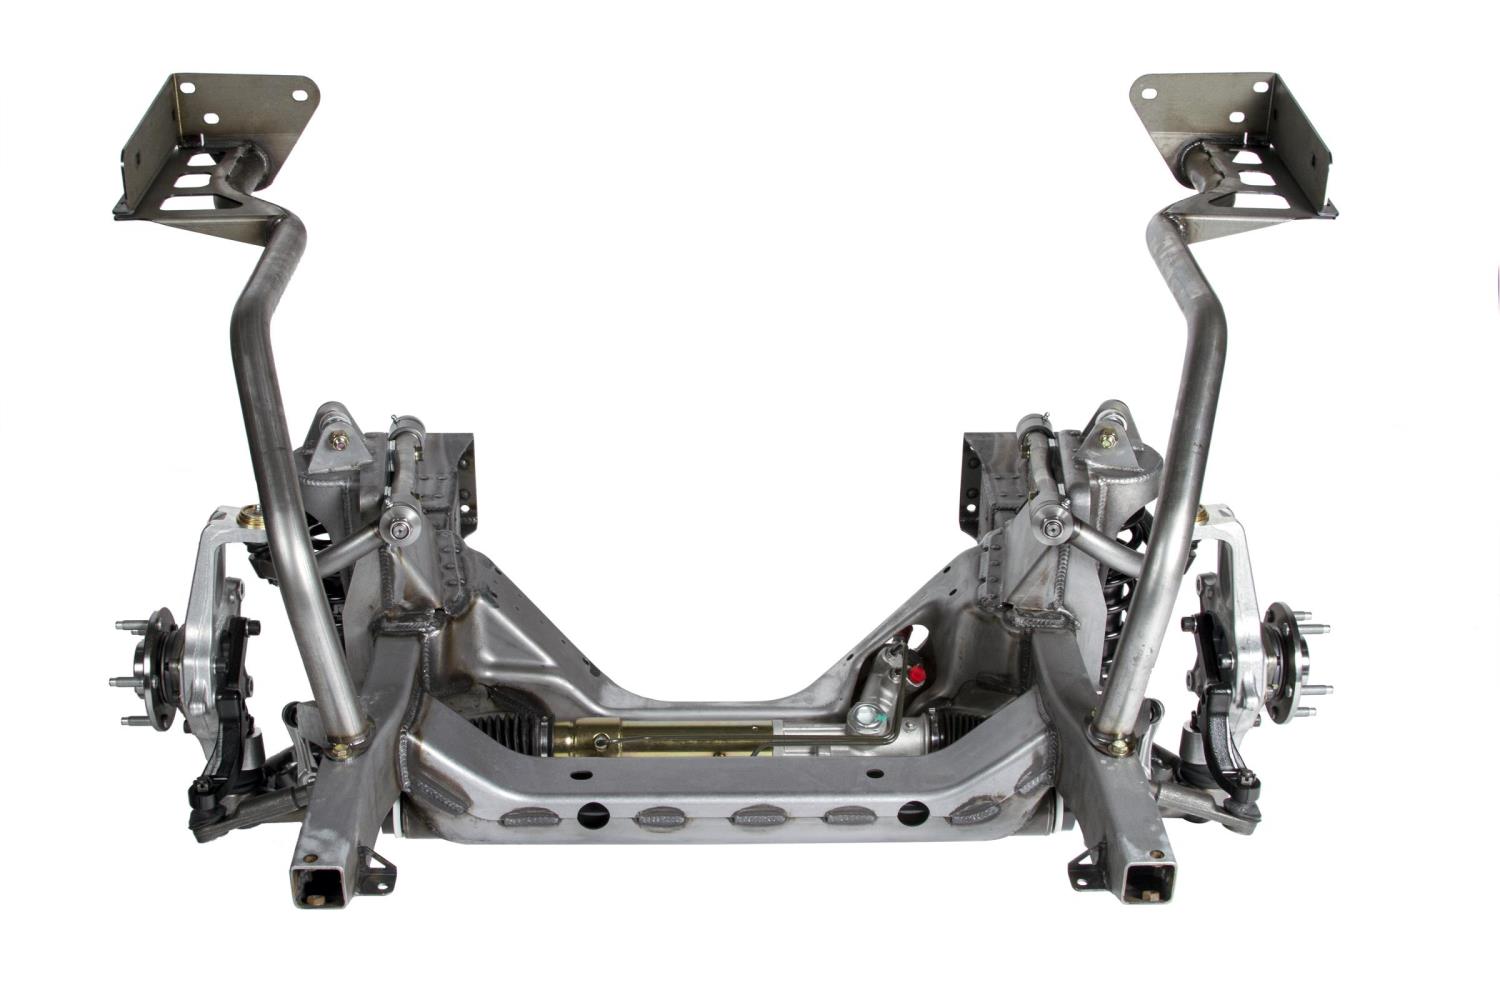 CHEVY II FRONT FRAME